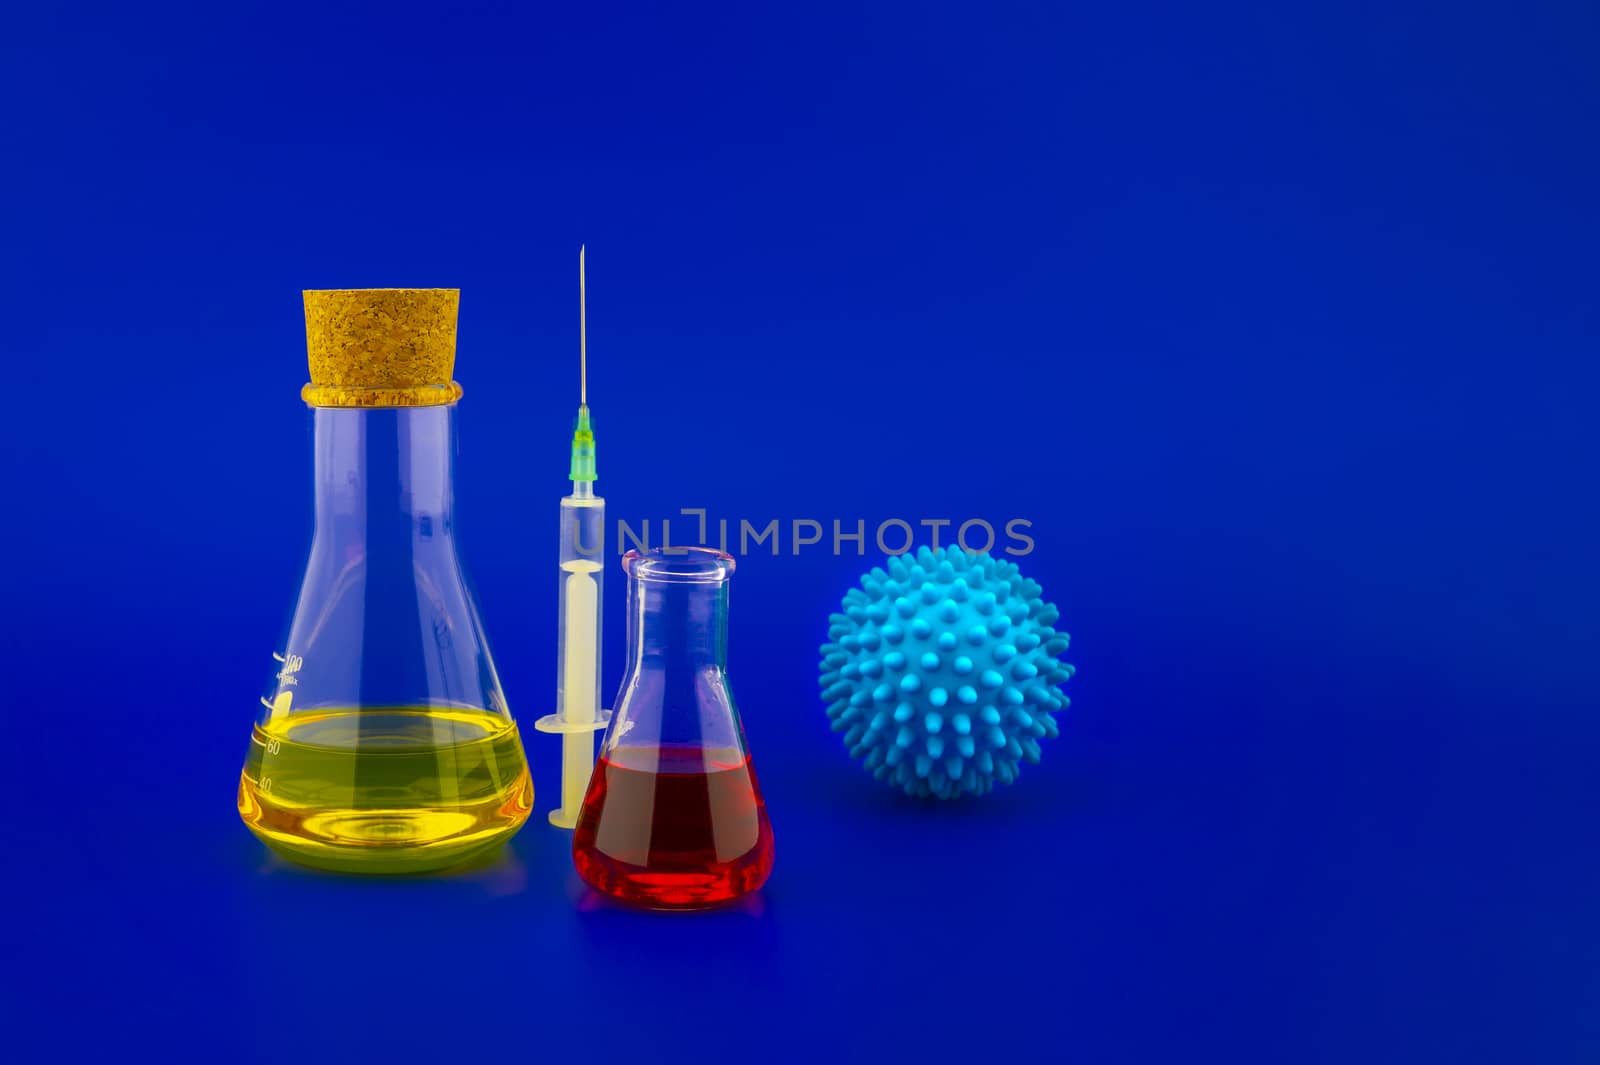 Concept of research for a Covid-19 vaccine with a conical lab flasks with yellow and red solutions alongside a hypodermic syringe and blue virus molecules over a blue background with copy space